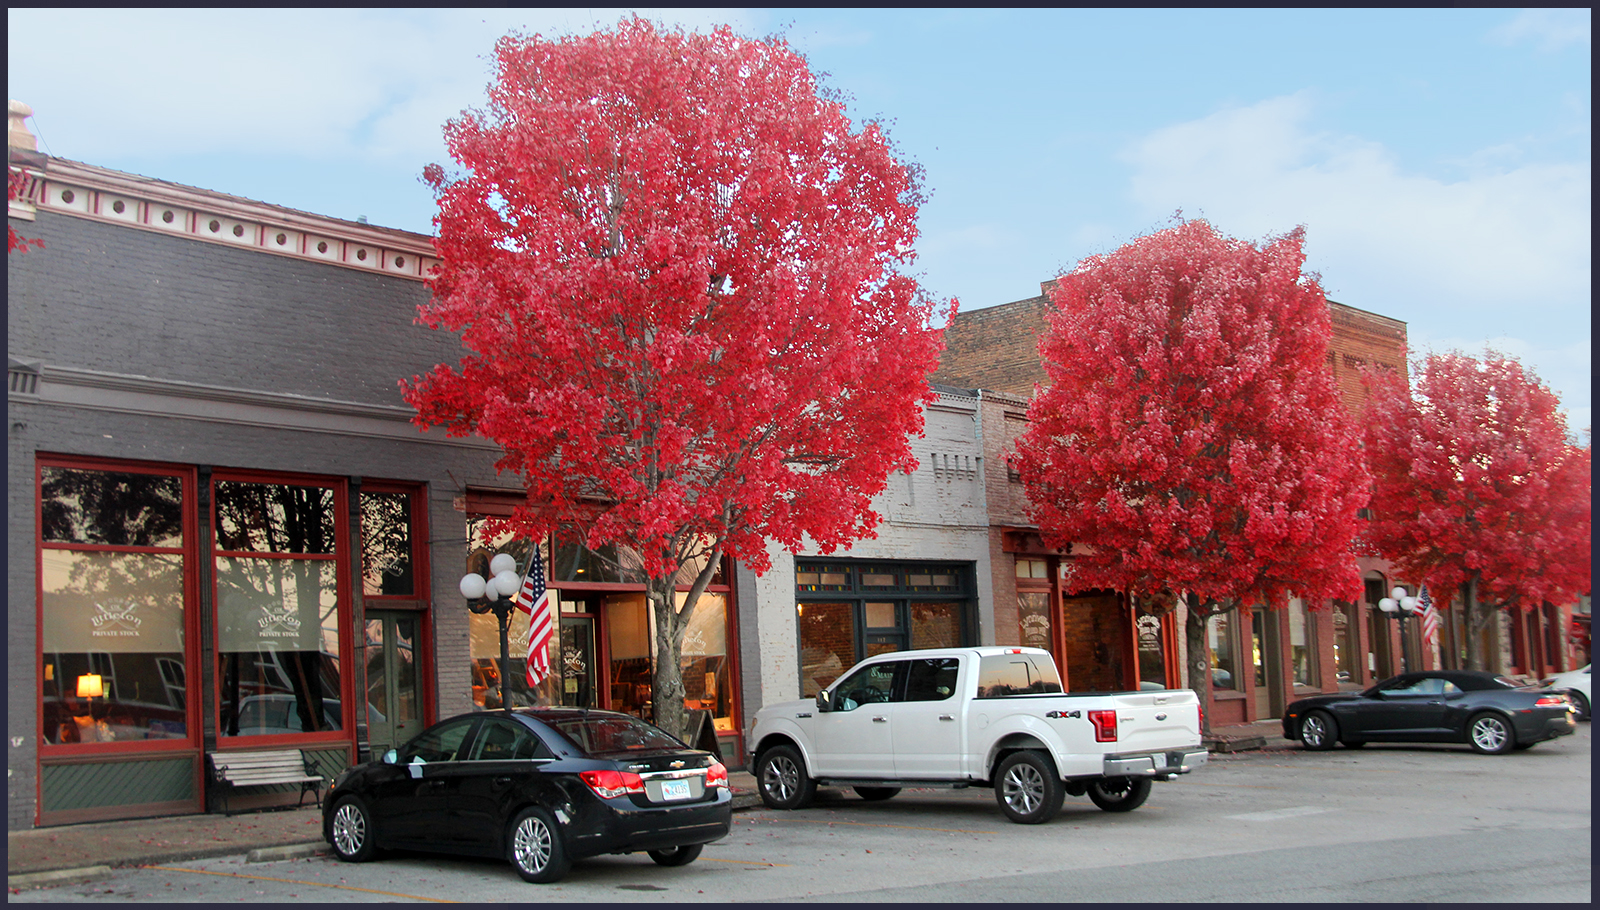 The downtown Lynnville town row, a few vehicles parked out front, and the three maple trees in view are full and red-leafed